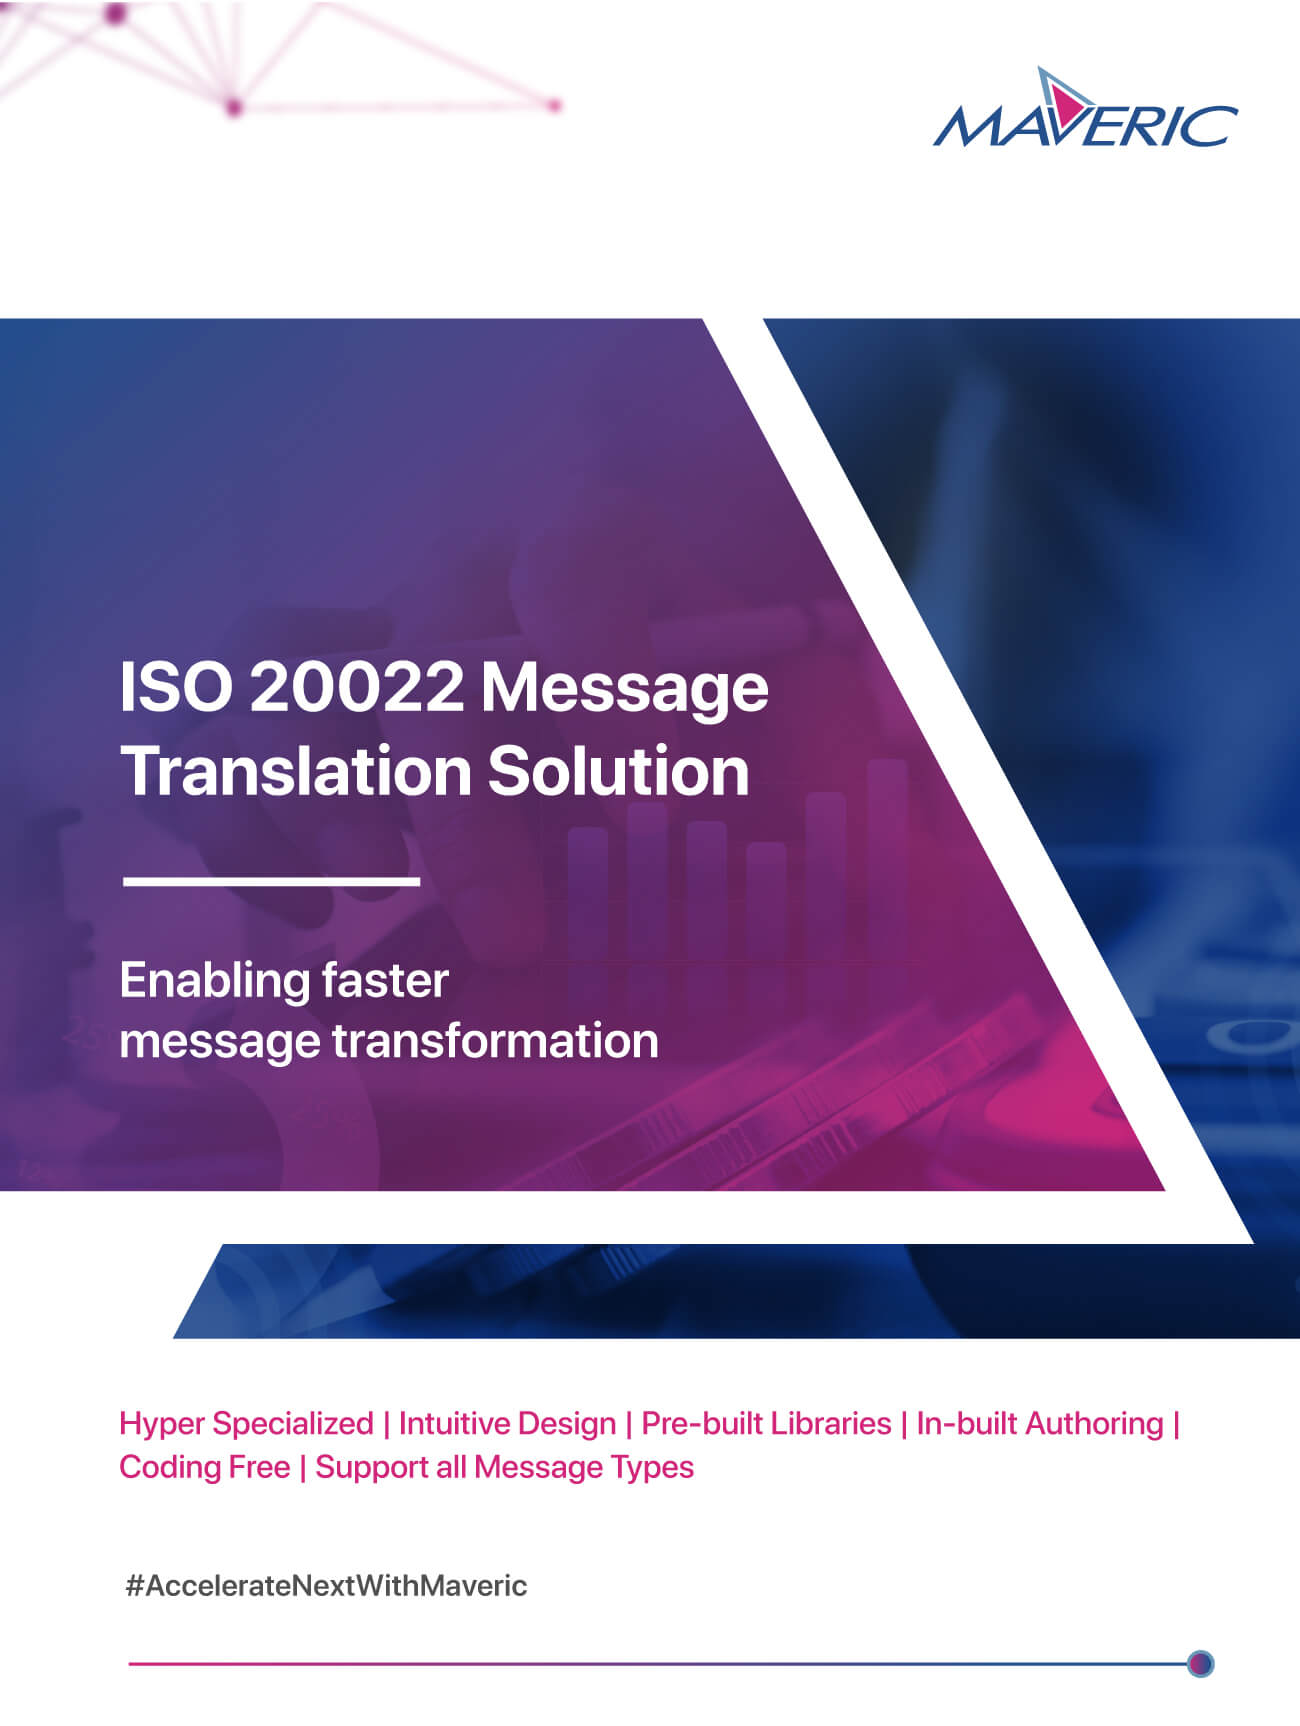 Maveric Message Translation solution – ISO 20022 compliance made simple